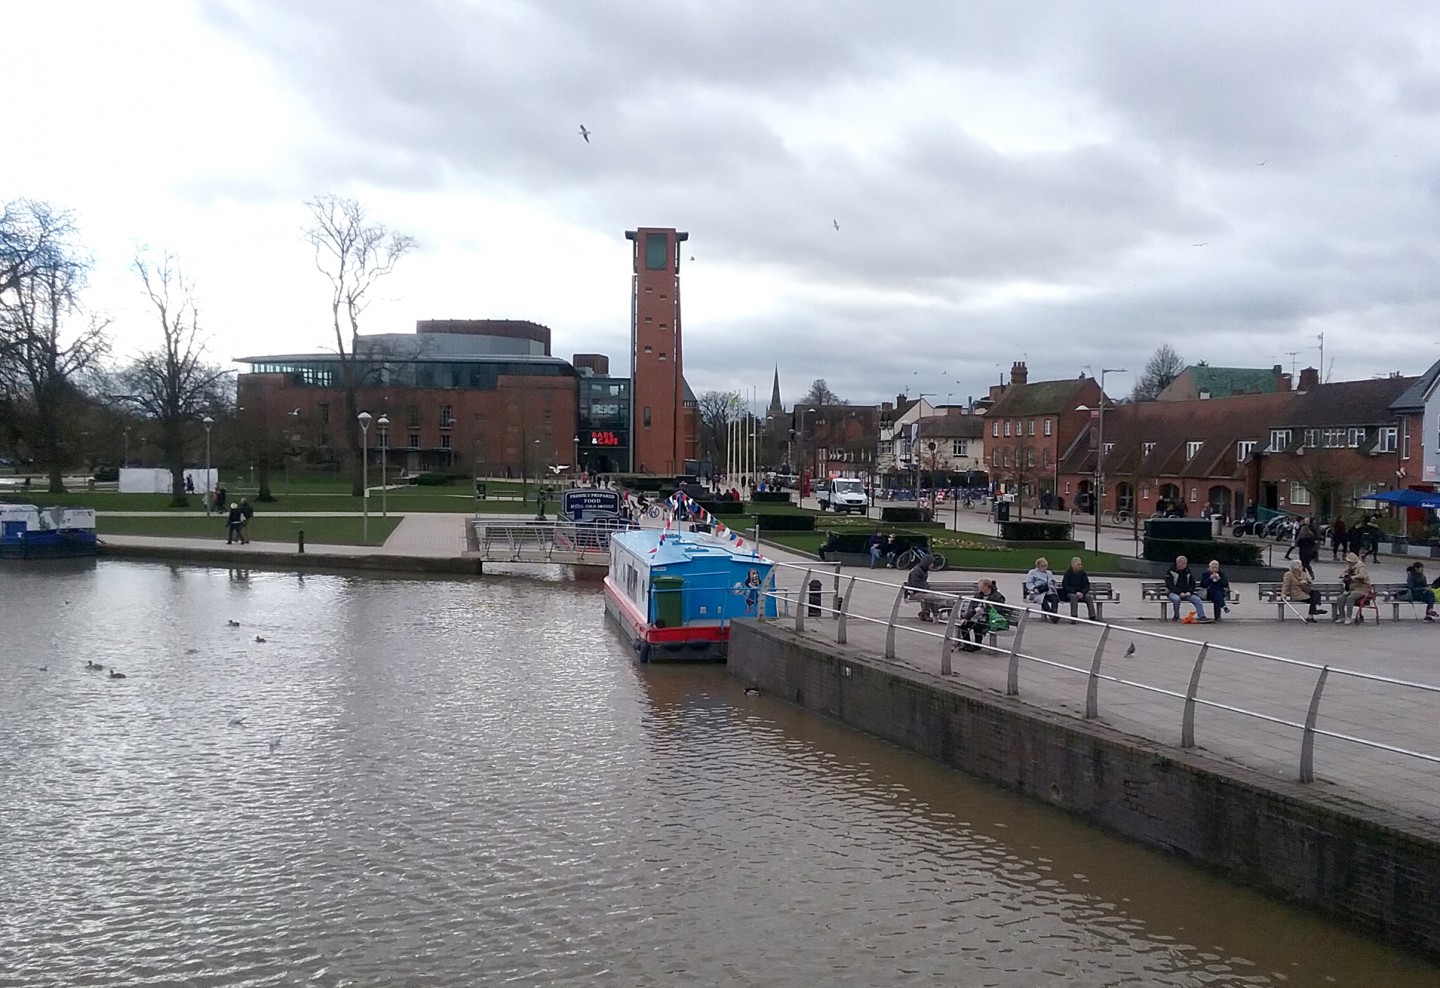 Canal basin with the Royal Shakespeare Theatre in background, Stratford-upon-Avon